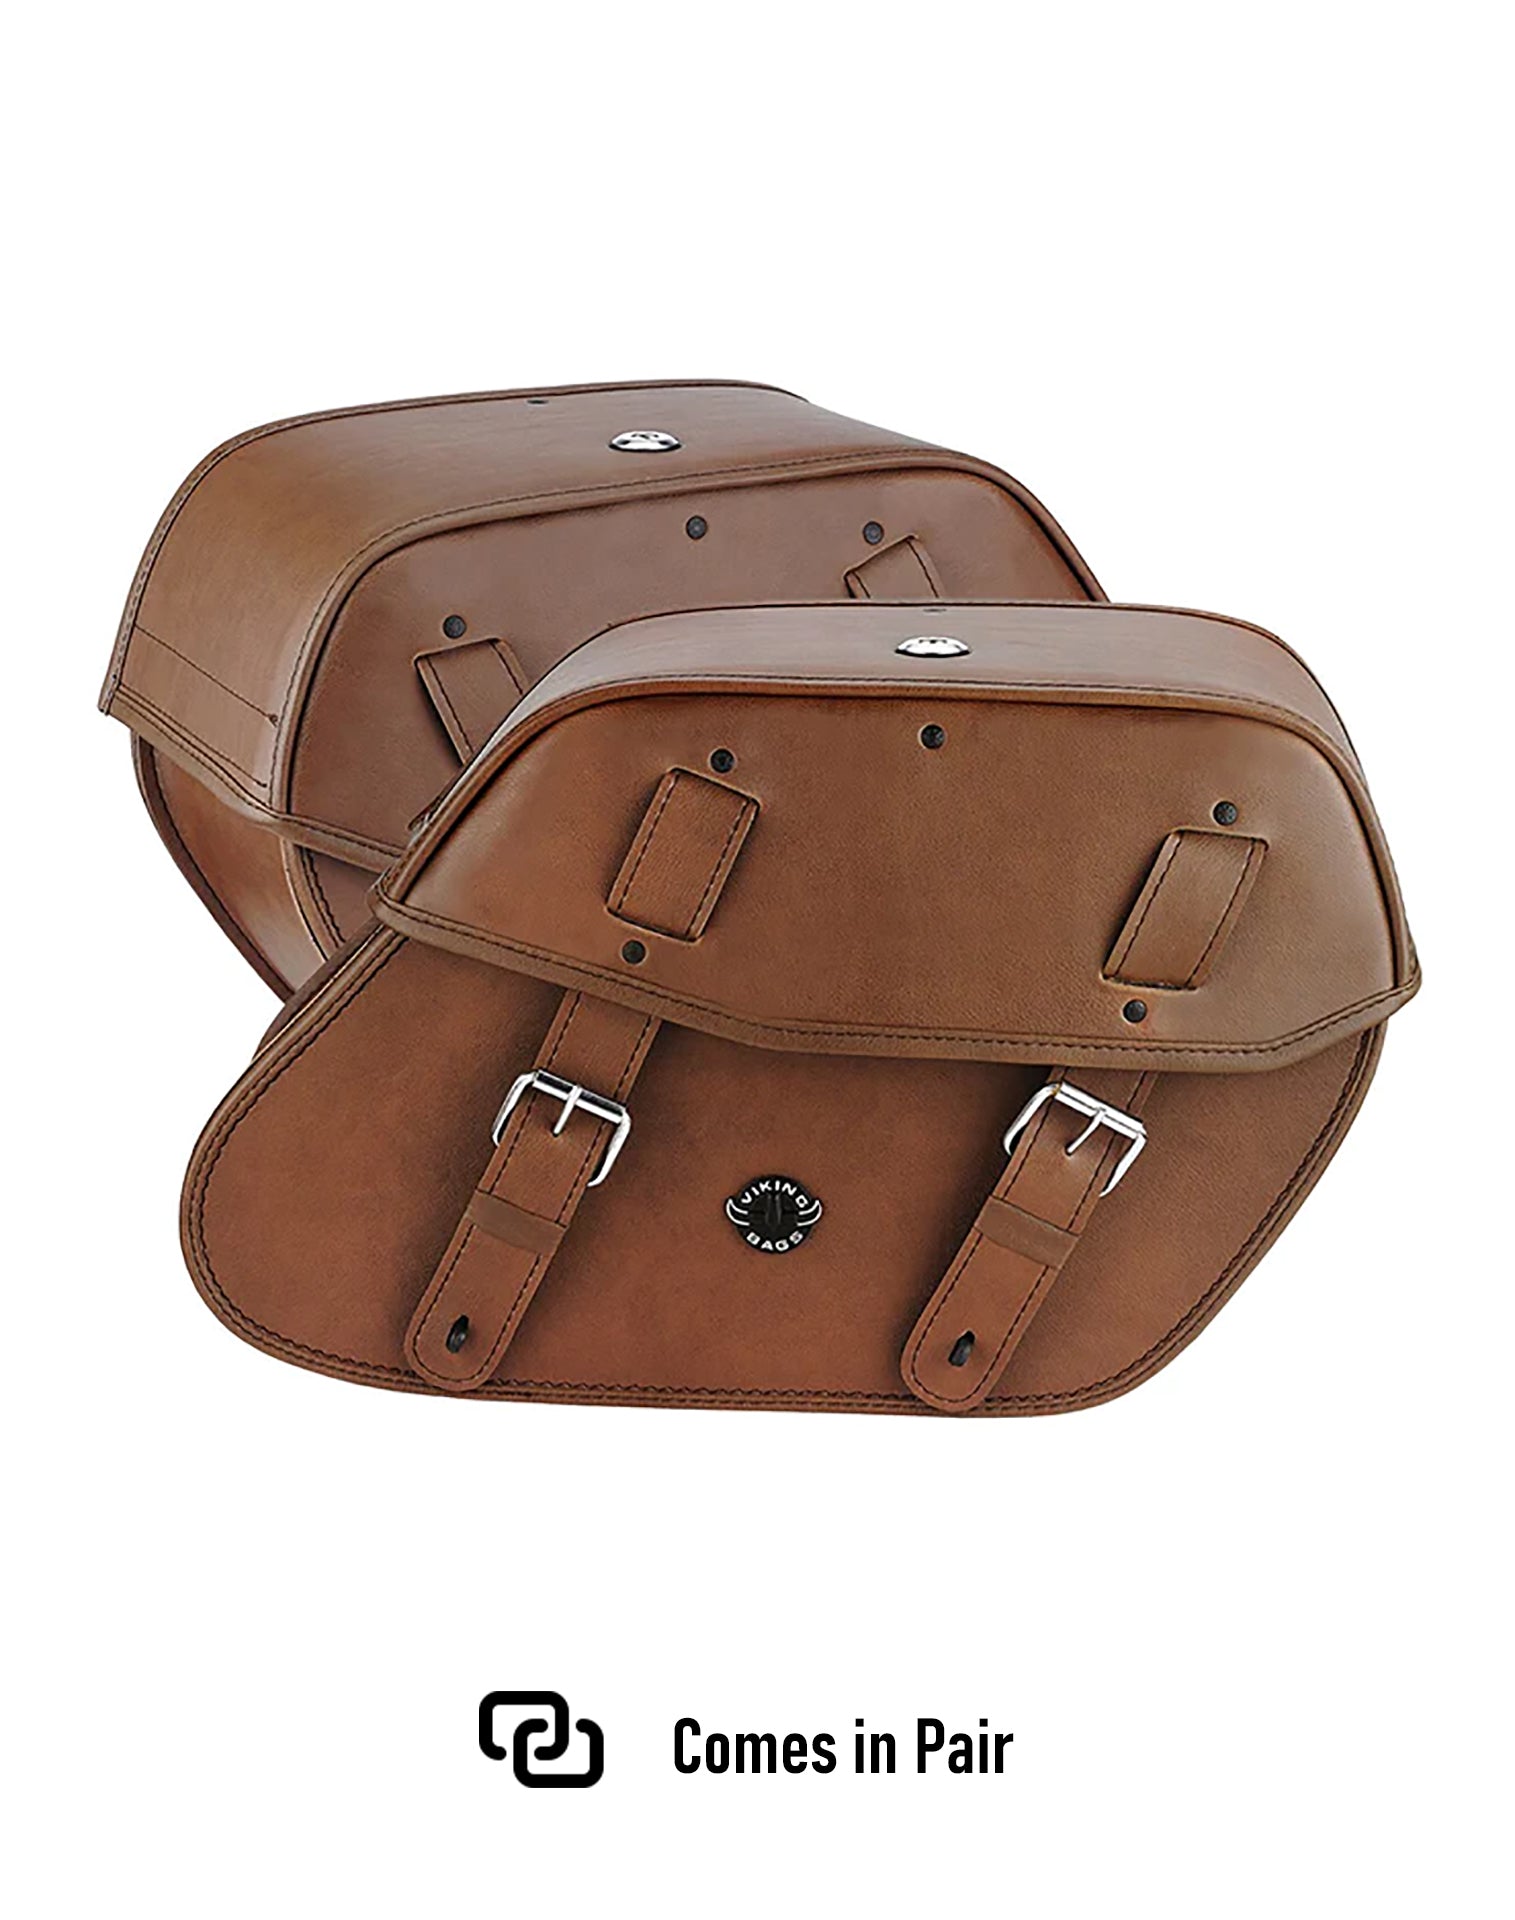 Viking Odin Brown Large Triumph Speedmaster Leather Motorcycle Saddlebags Weather Resistant Bags Comes in Pair